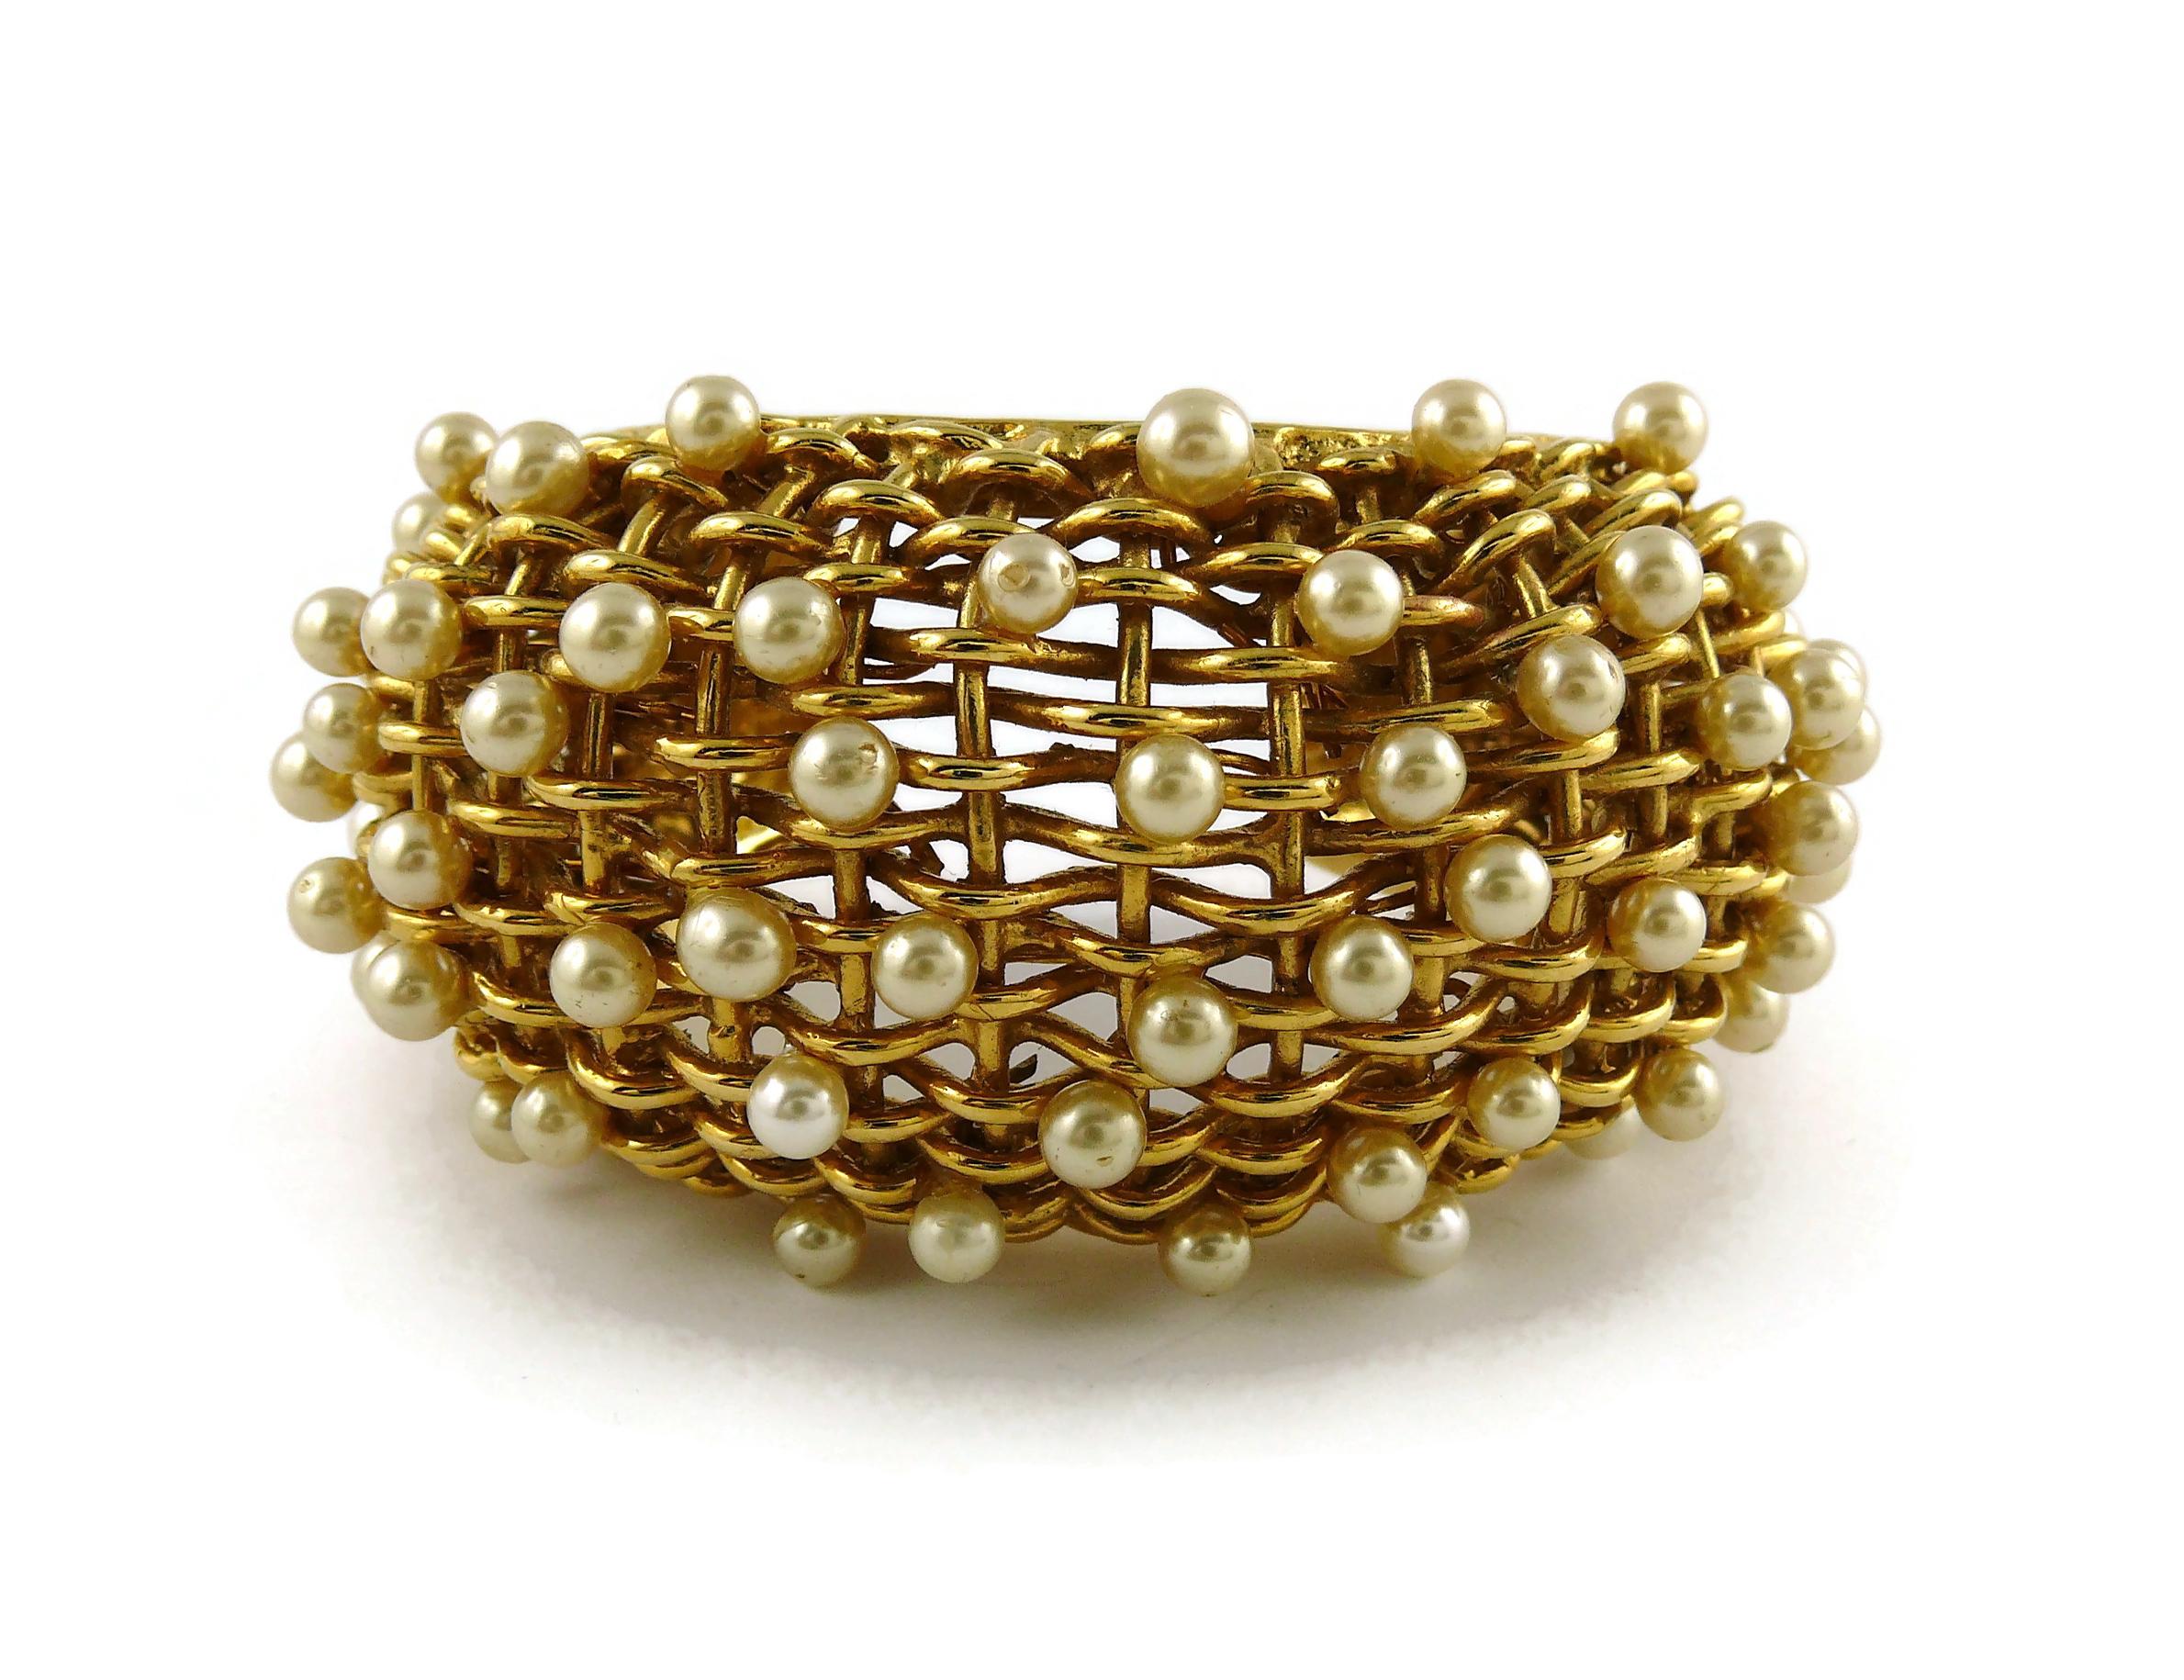 Chanel Vintage 1988 Gold Toned Braided Pearl Wide Cuff Bracelet For Sale 4